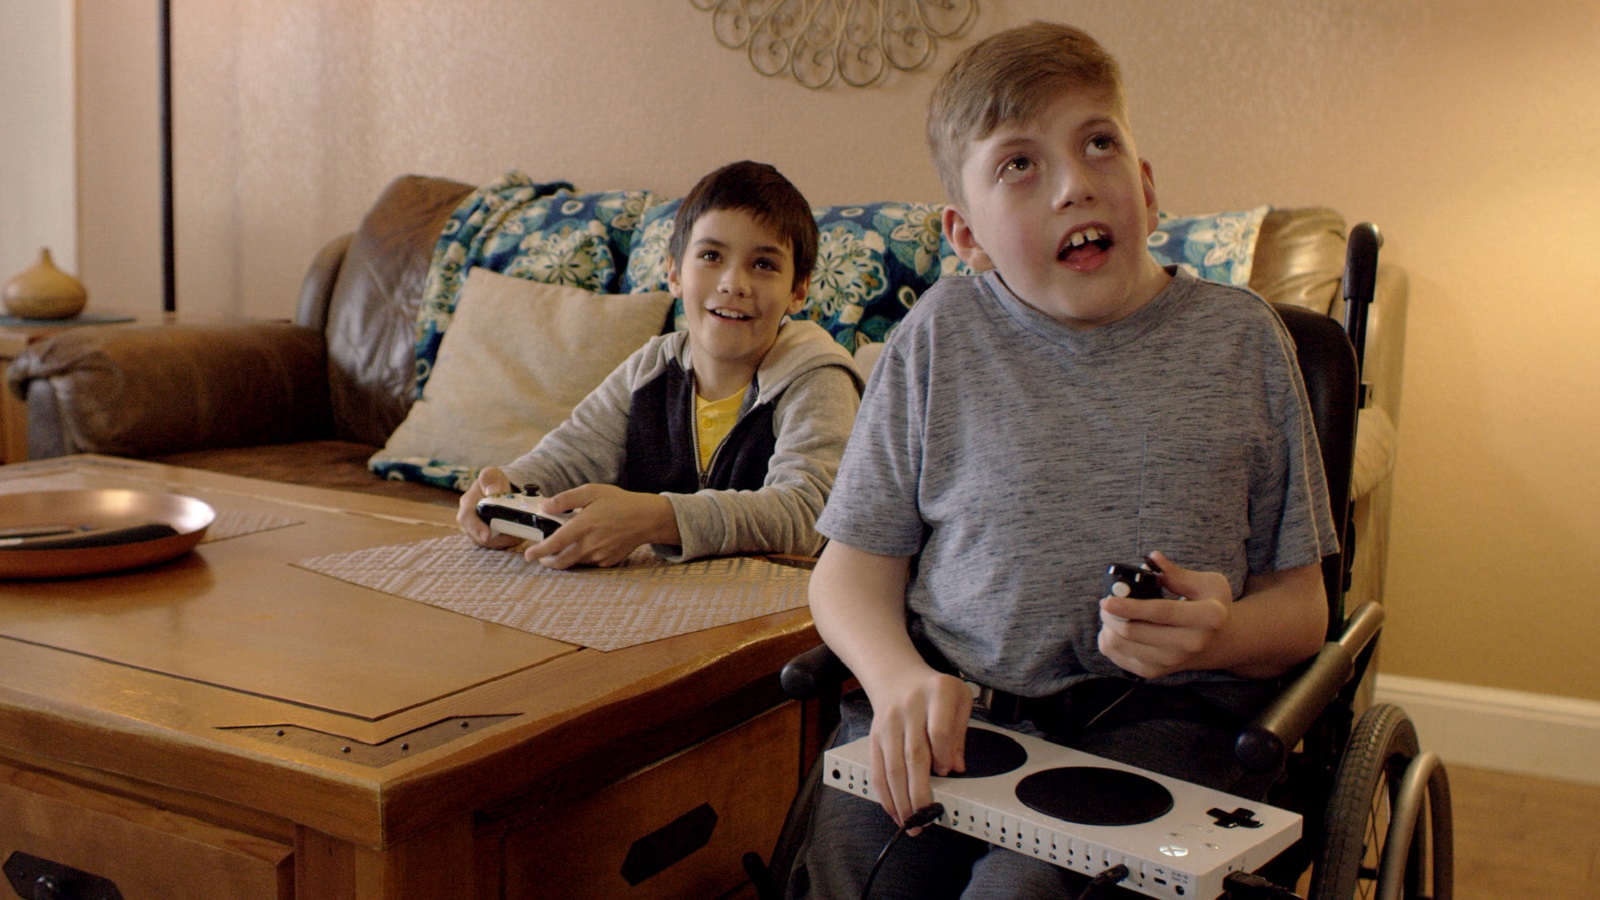 Microsoft Empowers Kids with Disabilities to Game1600 x 900